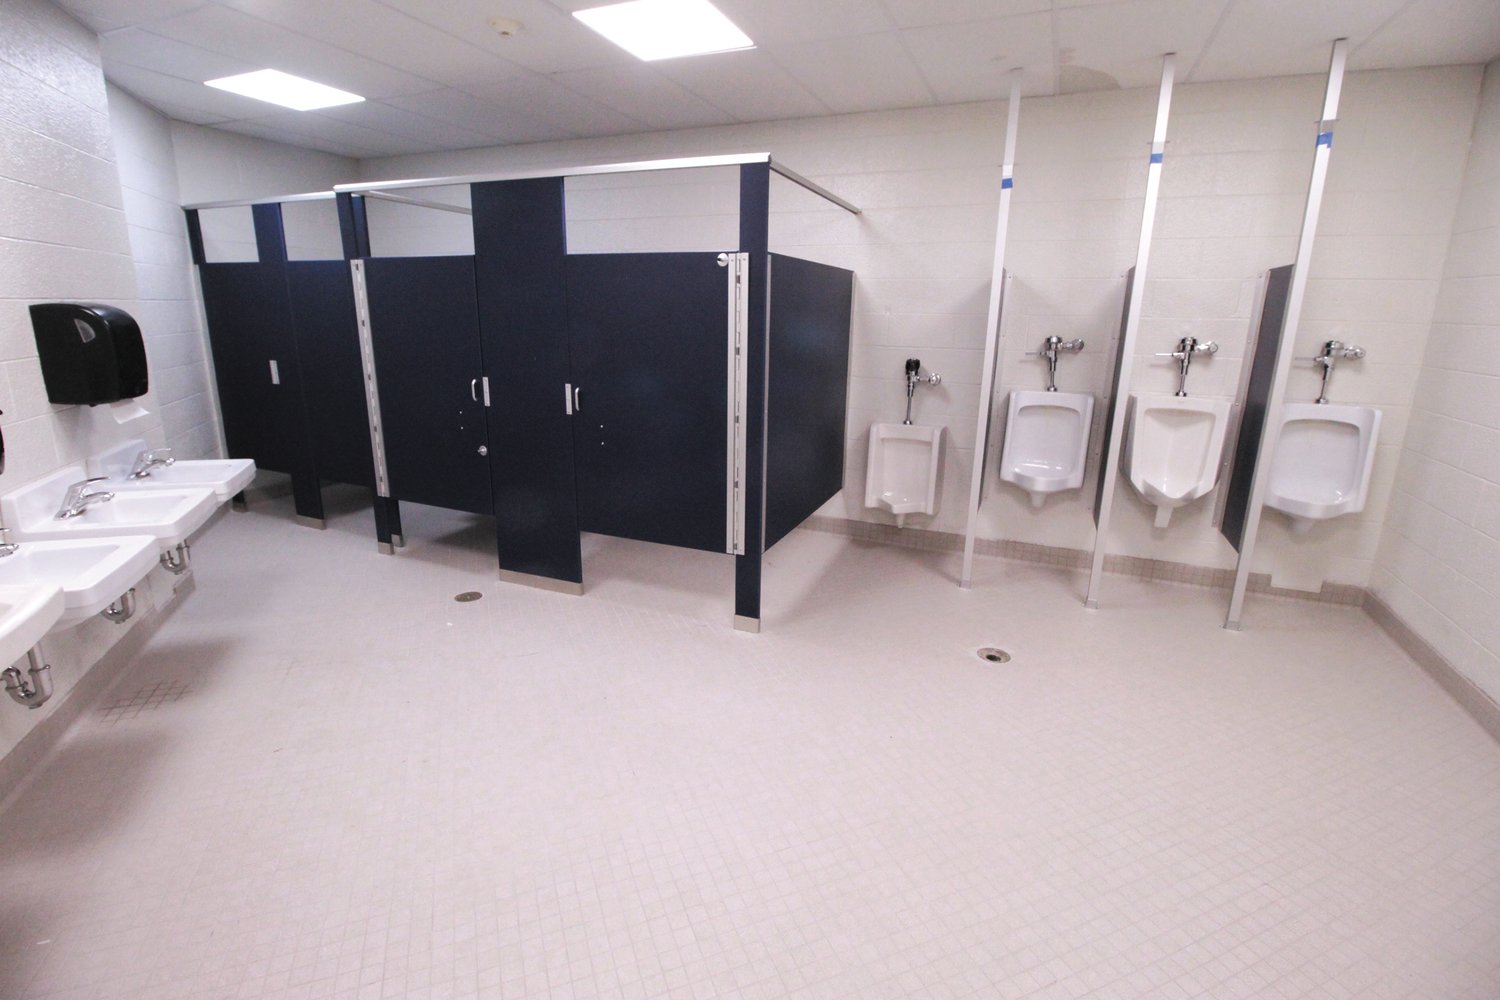 HARDLY RECOGNIZABLE: School restrooms have been outfitted with new fixtures, flooring, lighting and ceiling titles.